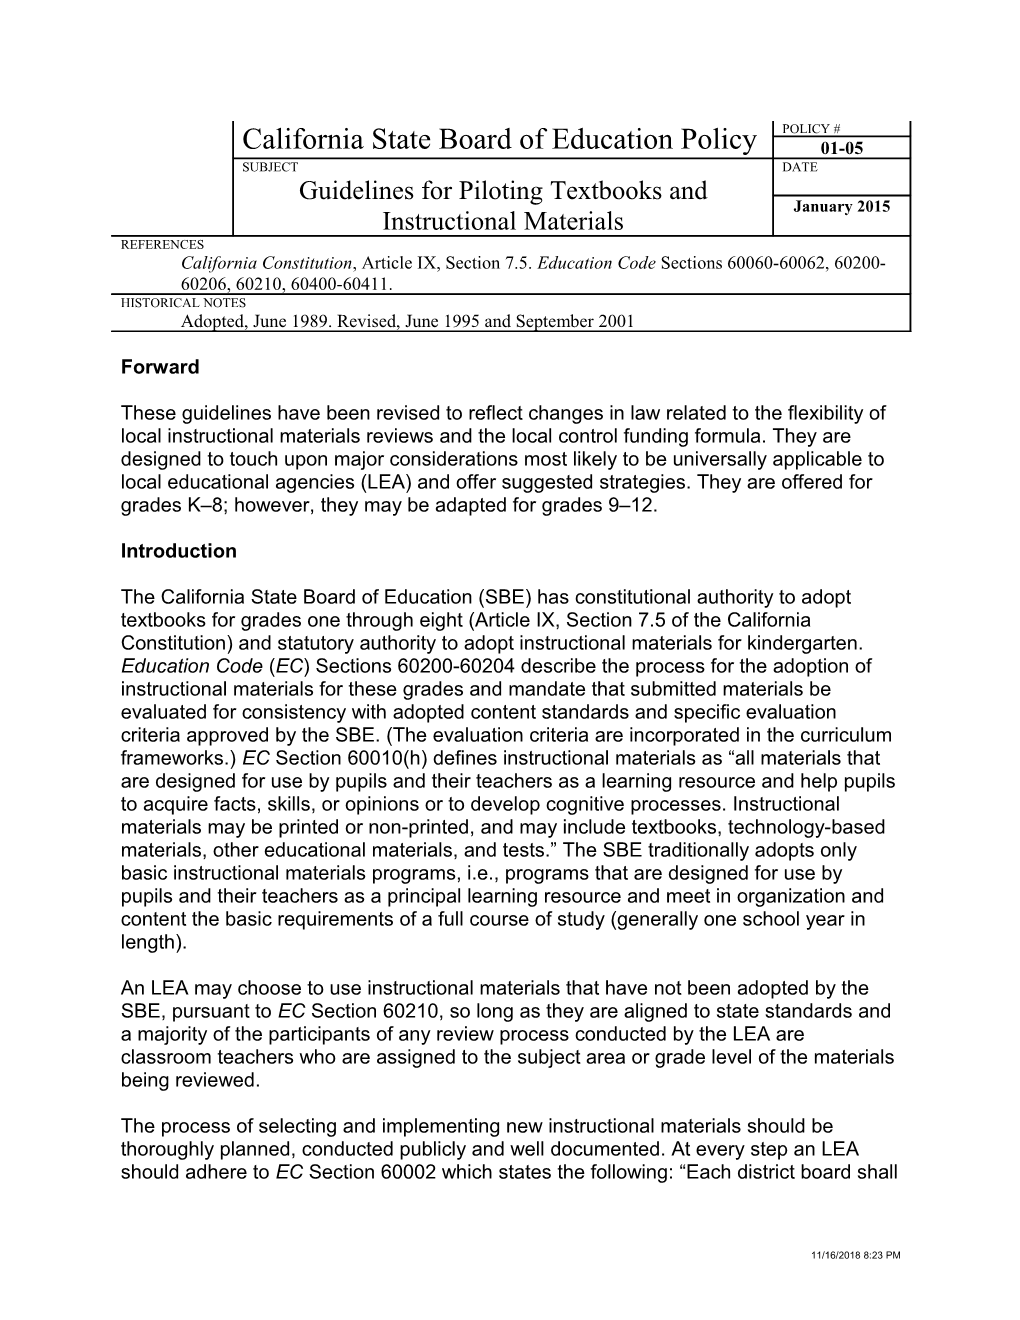 Guidelines for Piloting Textbooks and IM - Instructional Materials Adoption (CA Dept Of